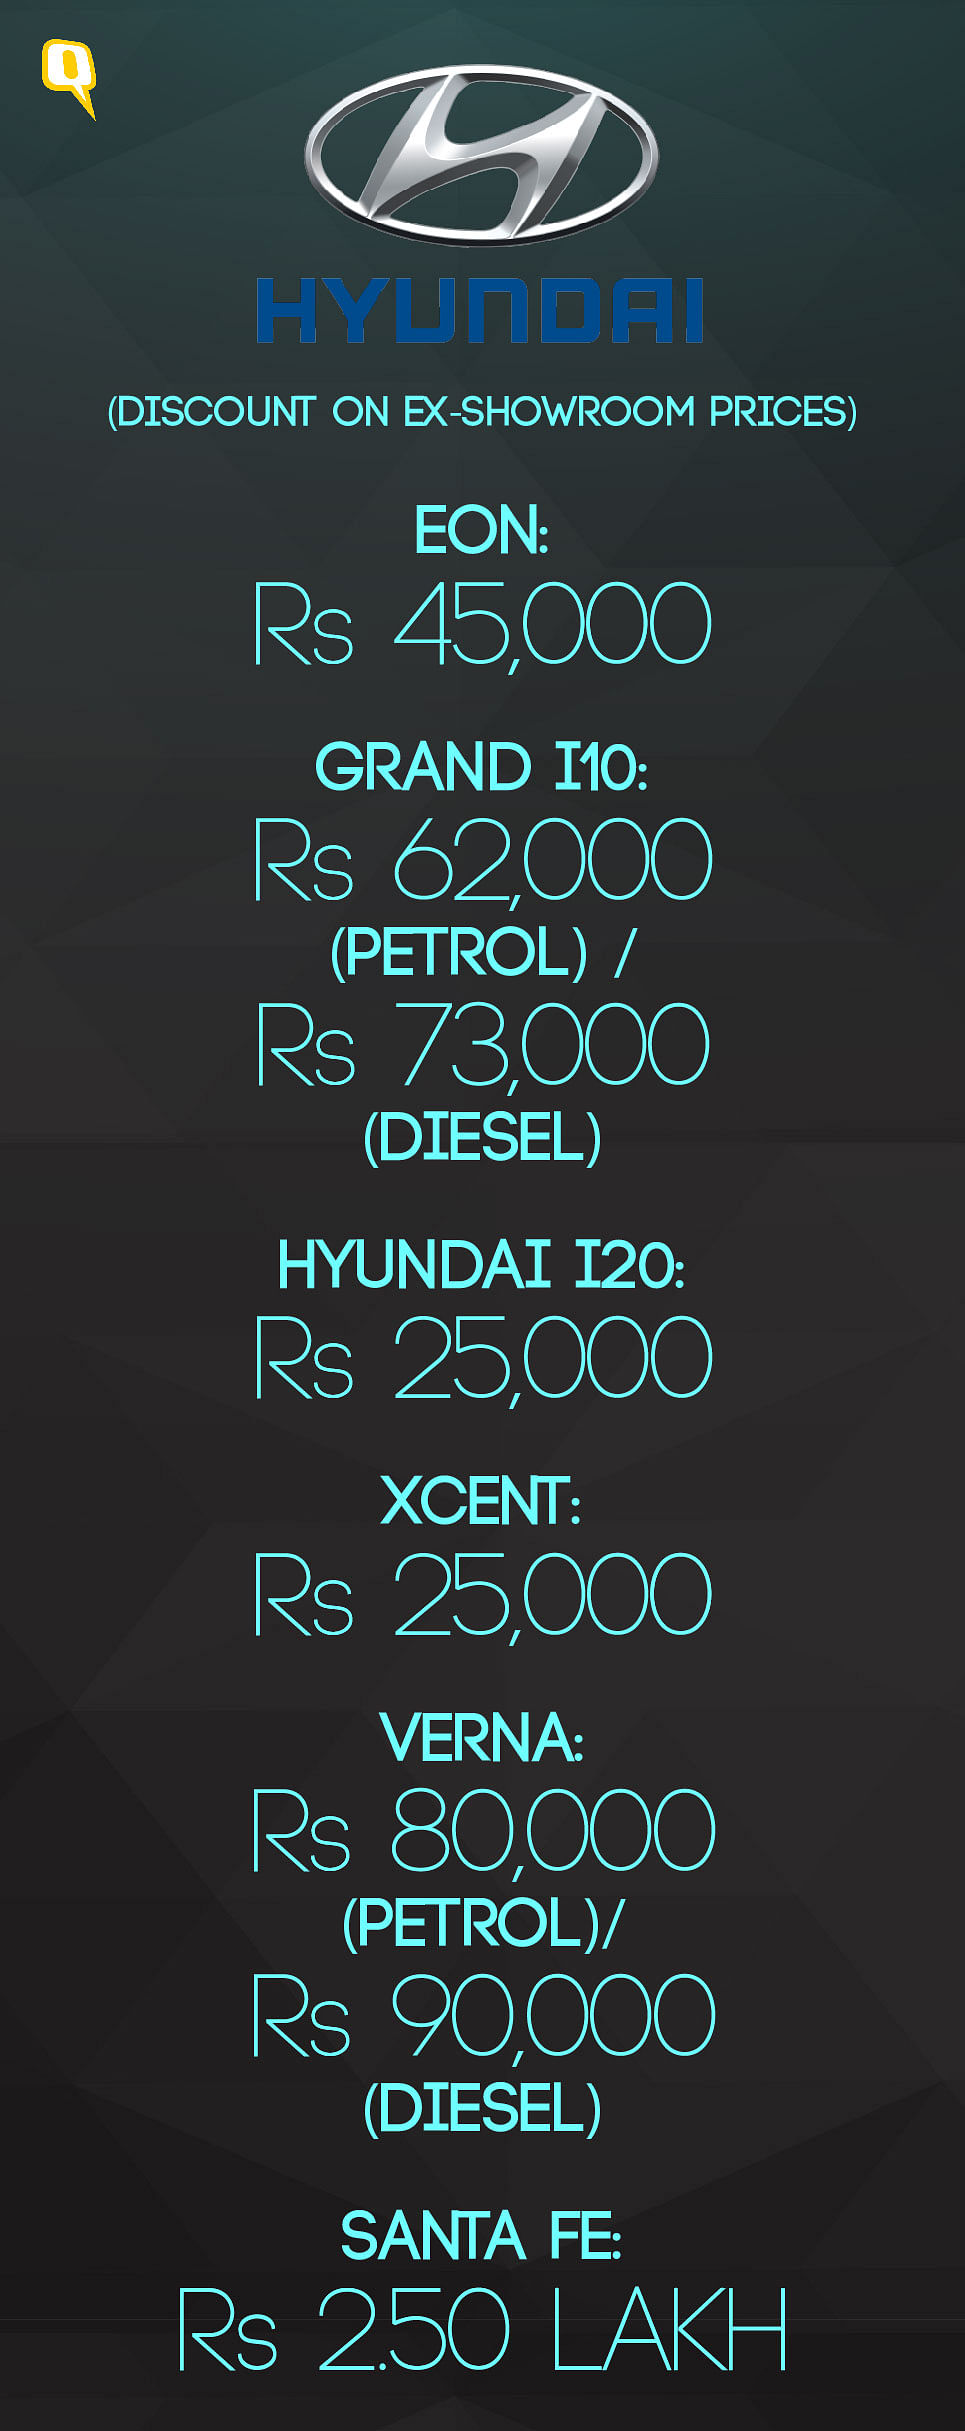 Car makers are rolling out huge discounts ahead of the roll out of GST. Here’s what to expect from various brands.